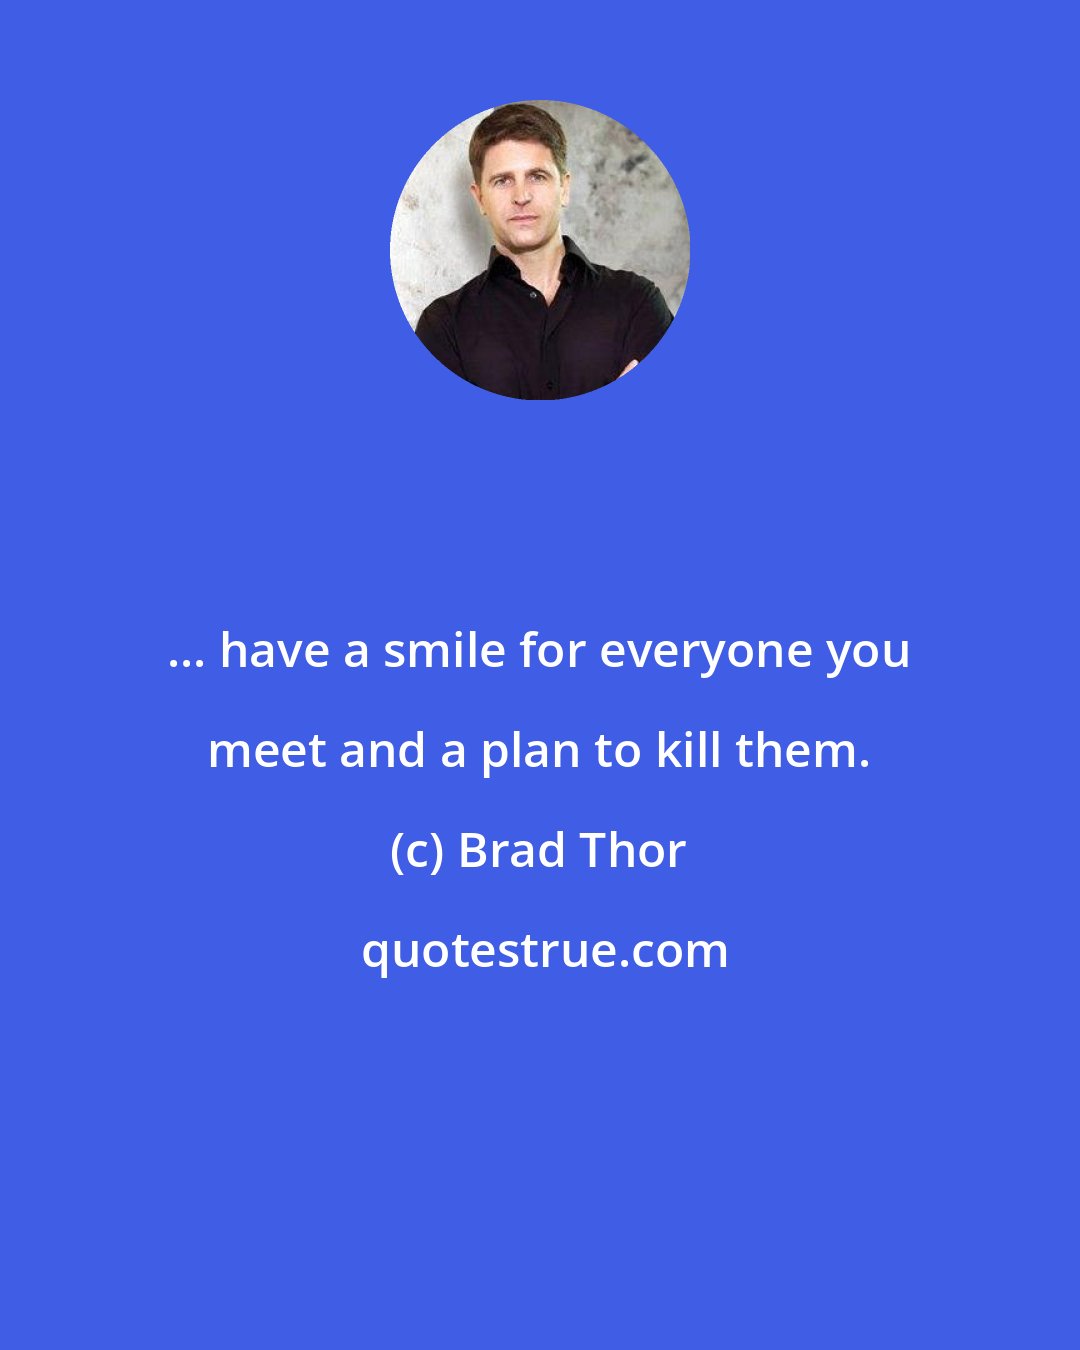 Brad Thor: ... have a smile for everyone you meet and a plan to kill them.